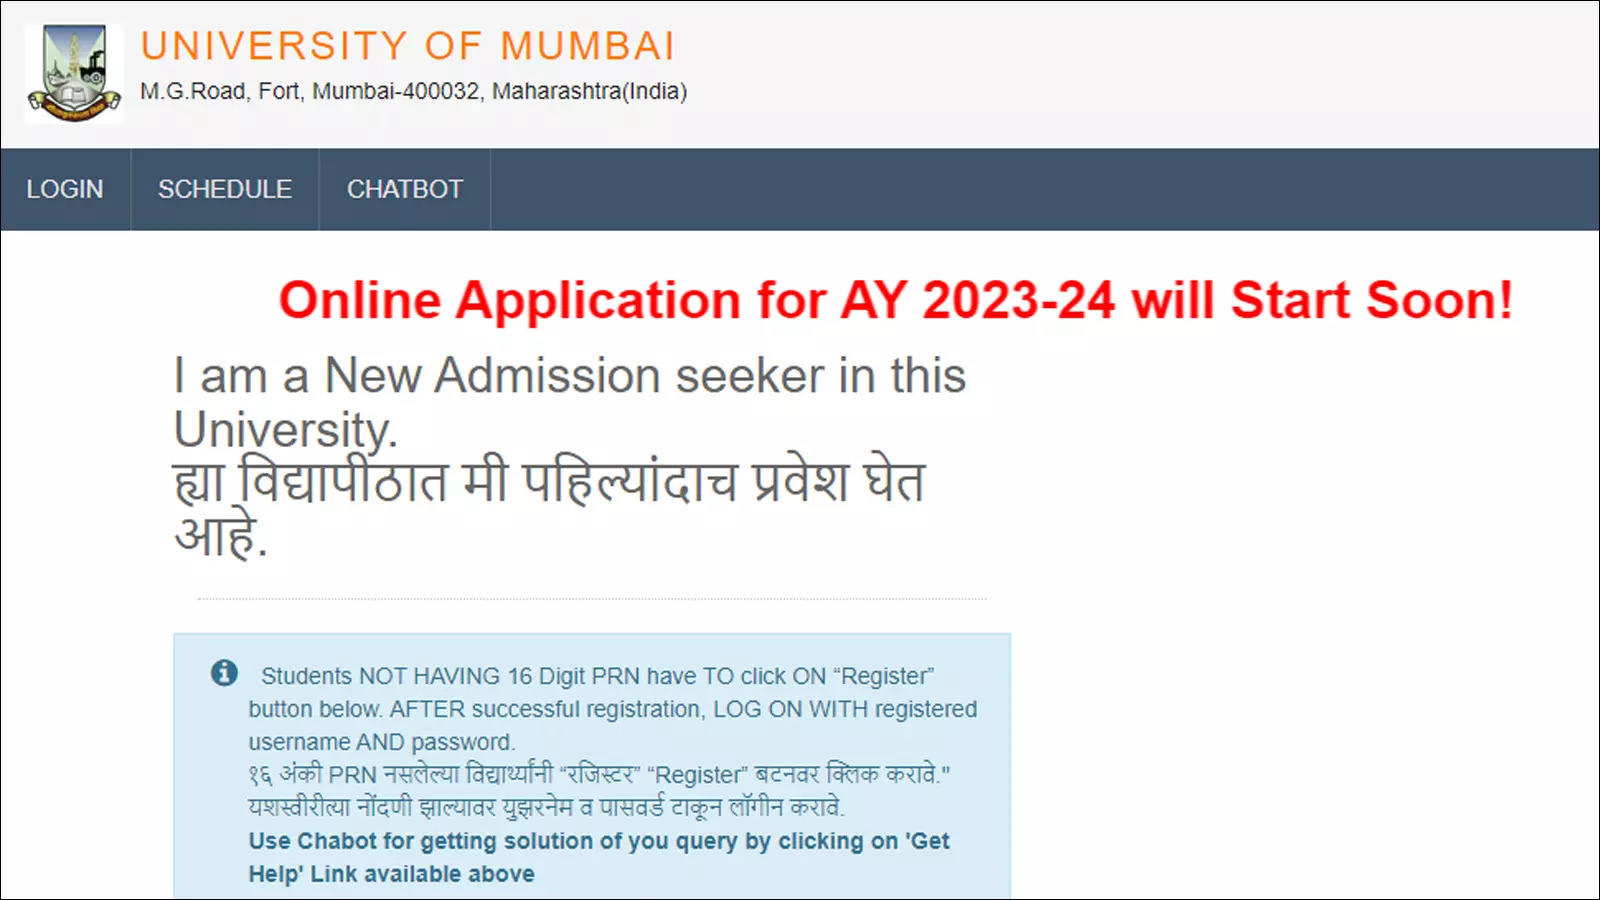 Mumbai University announces pre-admission online registration for 2023-24, check schedule here